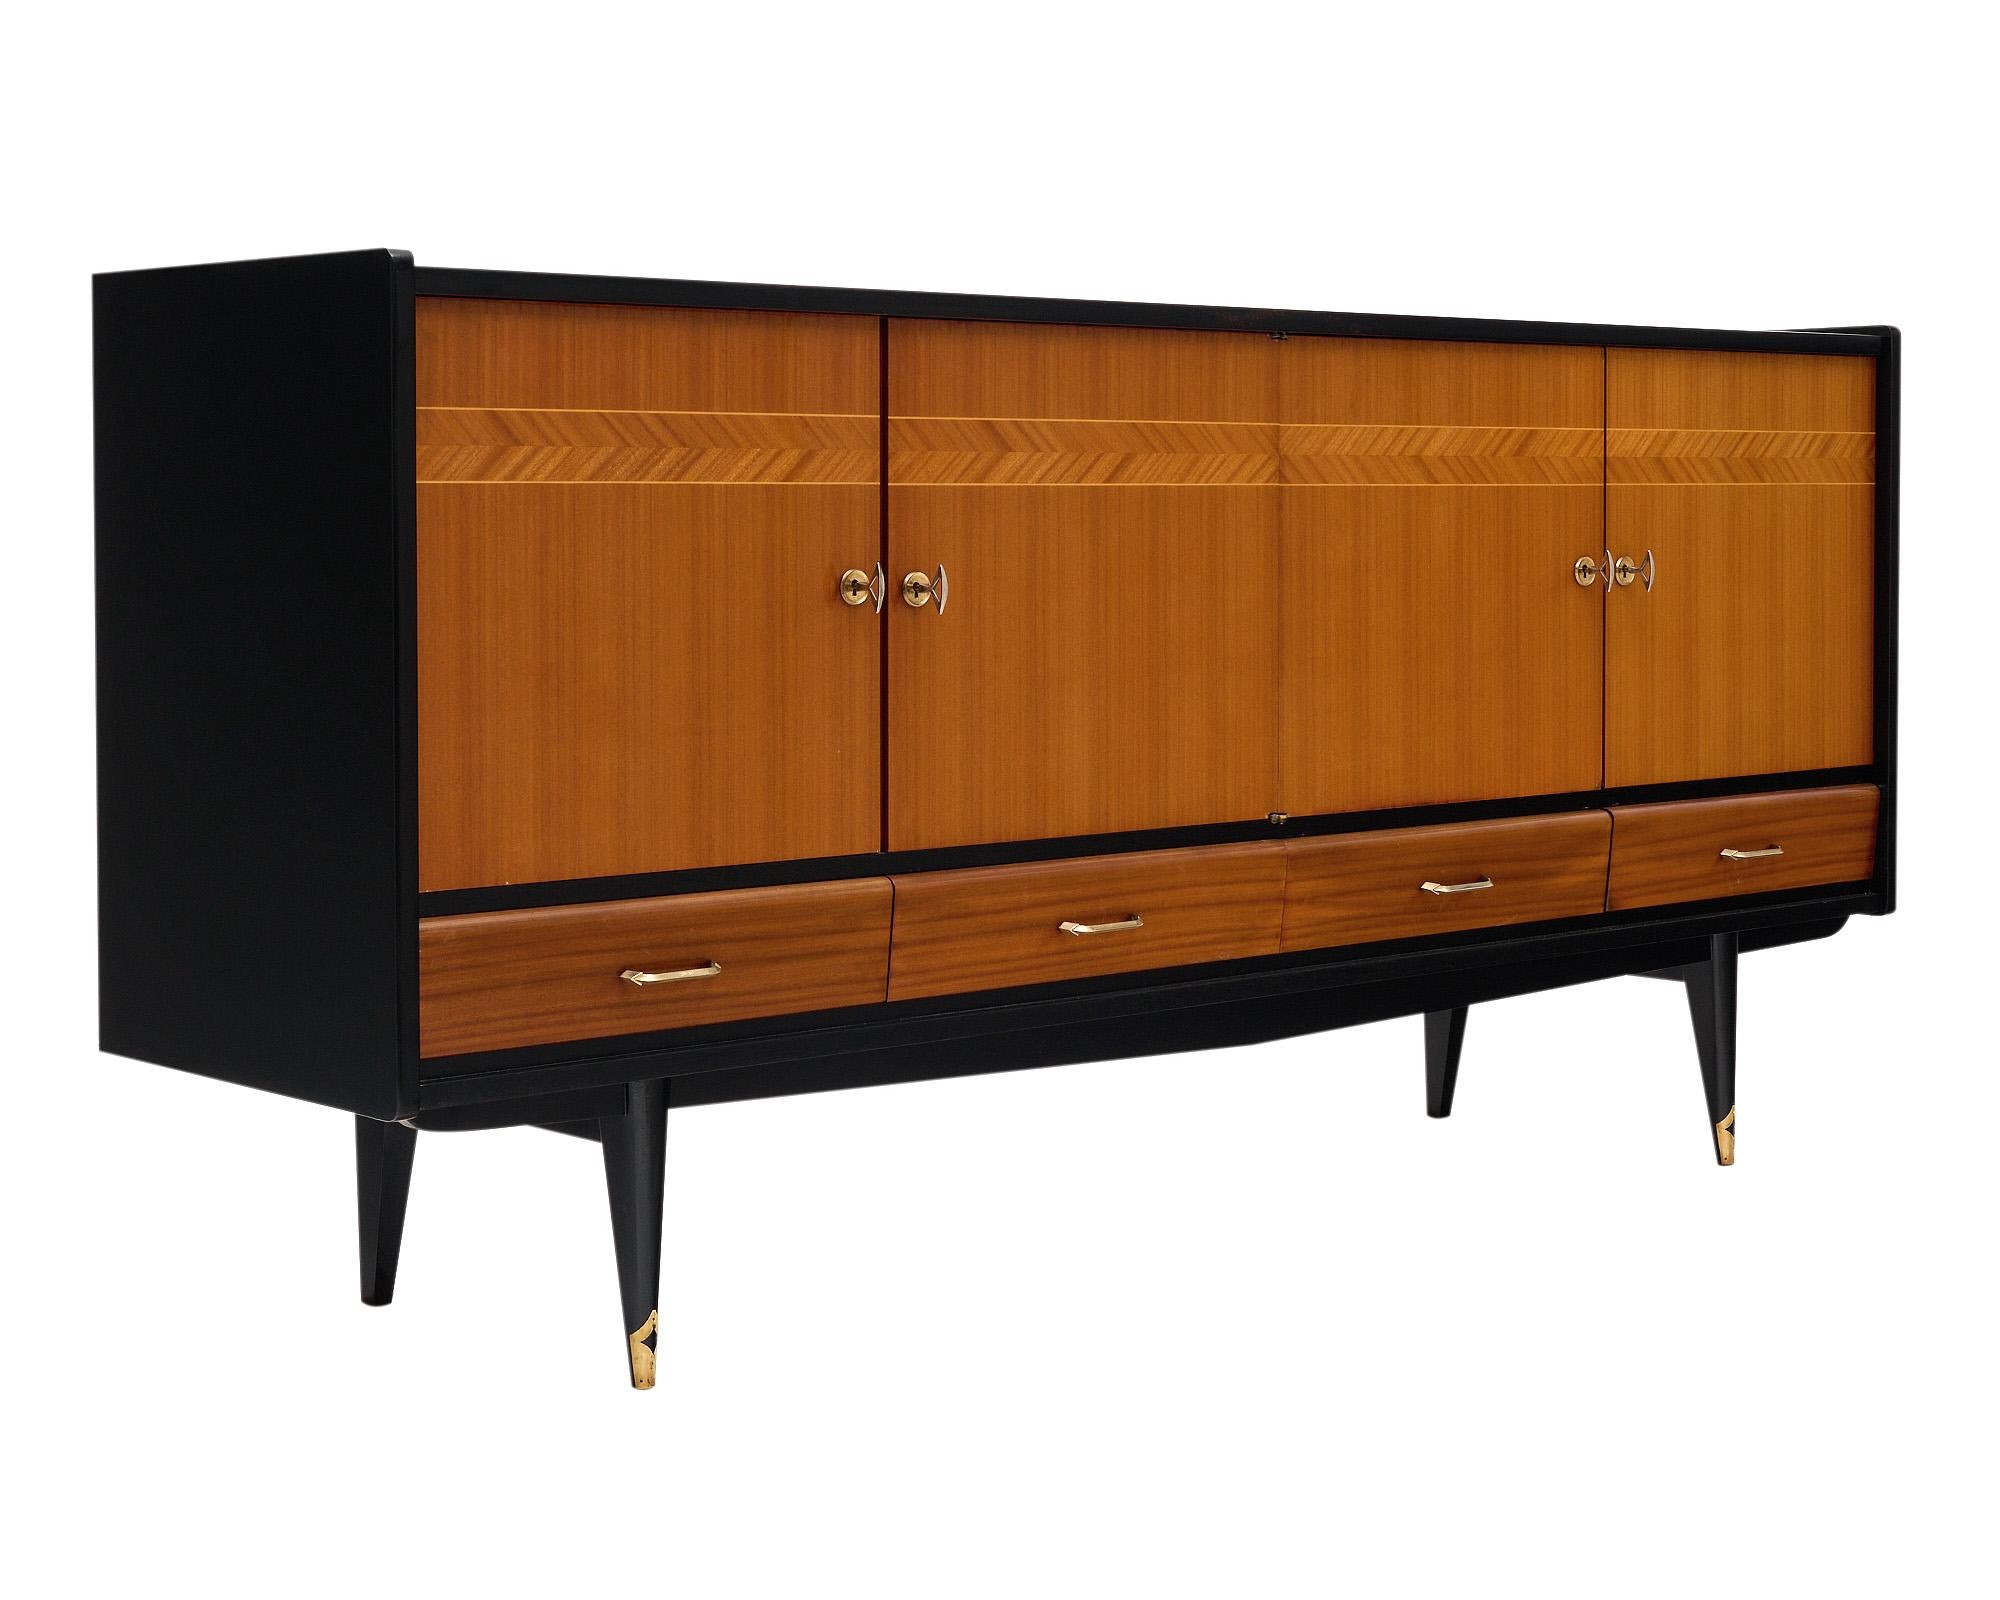 Buffet or enfilade from France with an inlaid rosewood façade and ebonized rosewood body. The piece is supported by four tapered legs, the front two feet are capped in brass. The four doors all have working locks and keys and open to interior